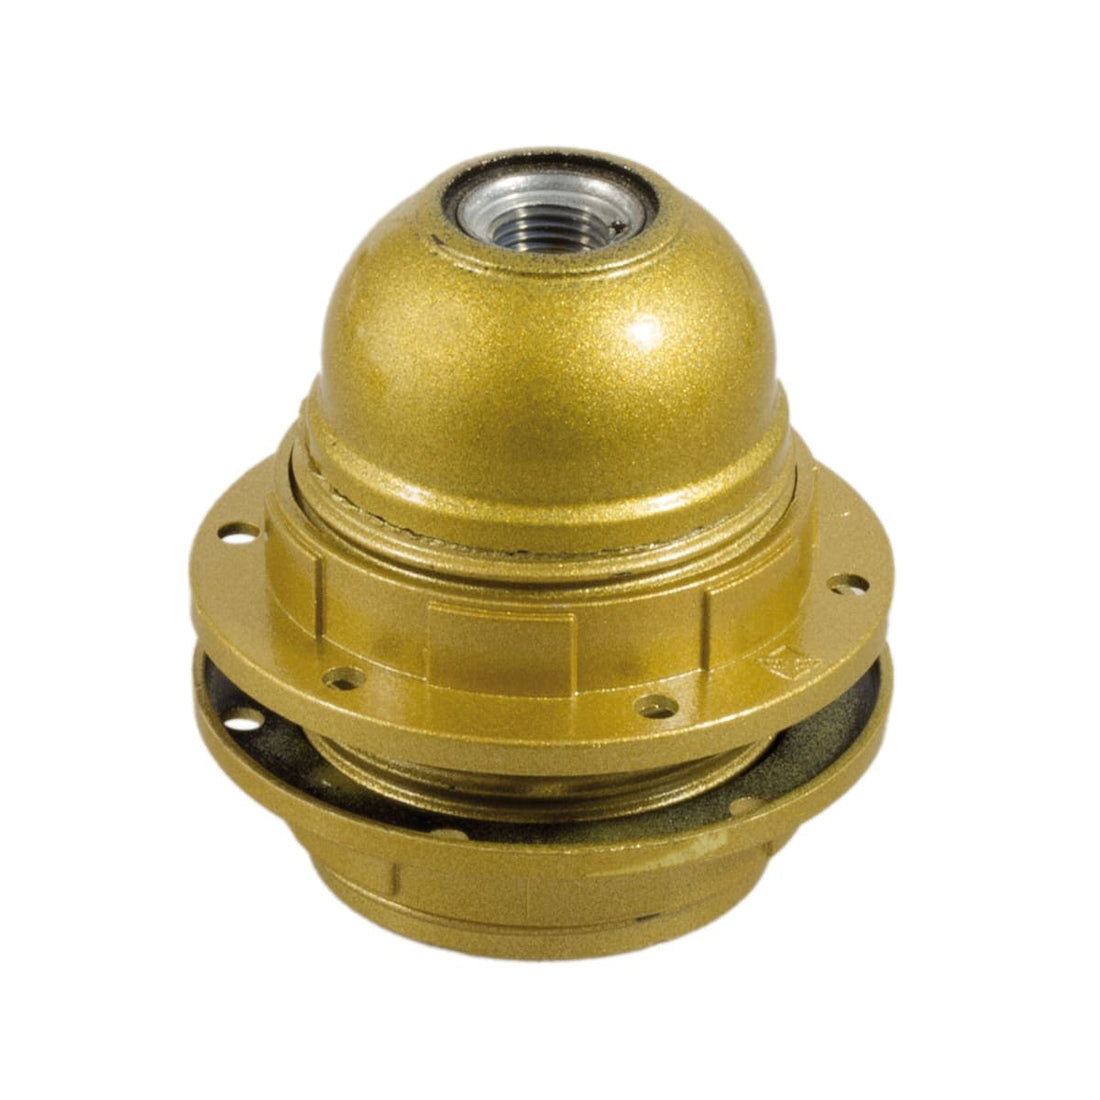 E27 LAMP HOLDER WITH GOLD RING